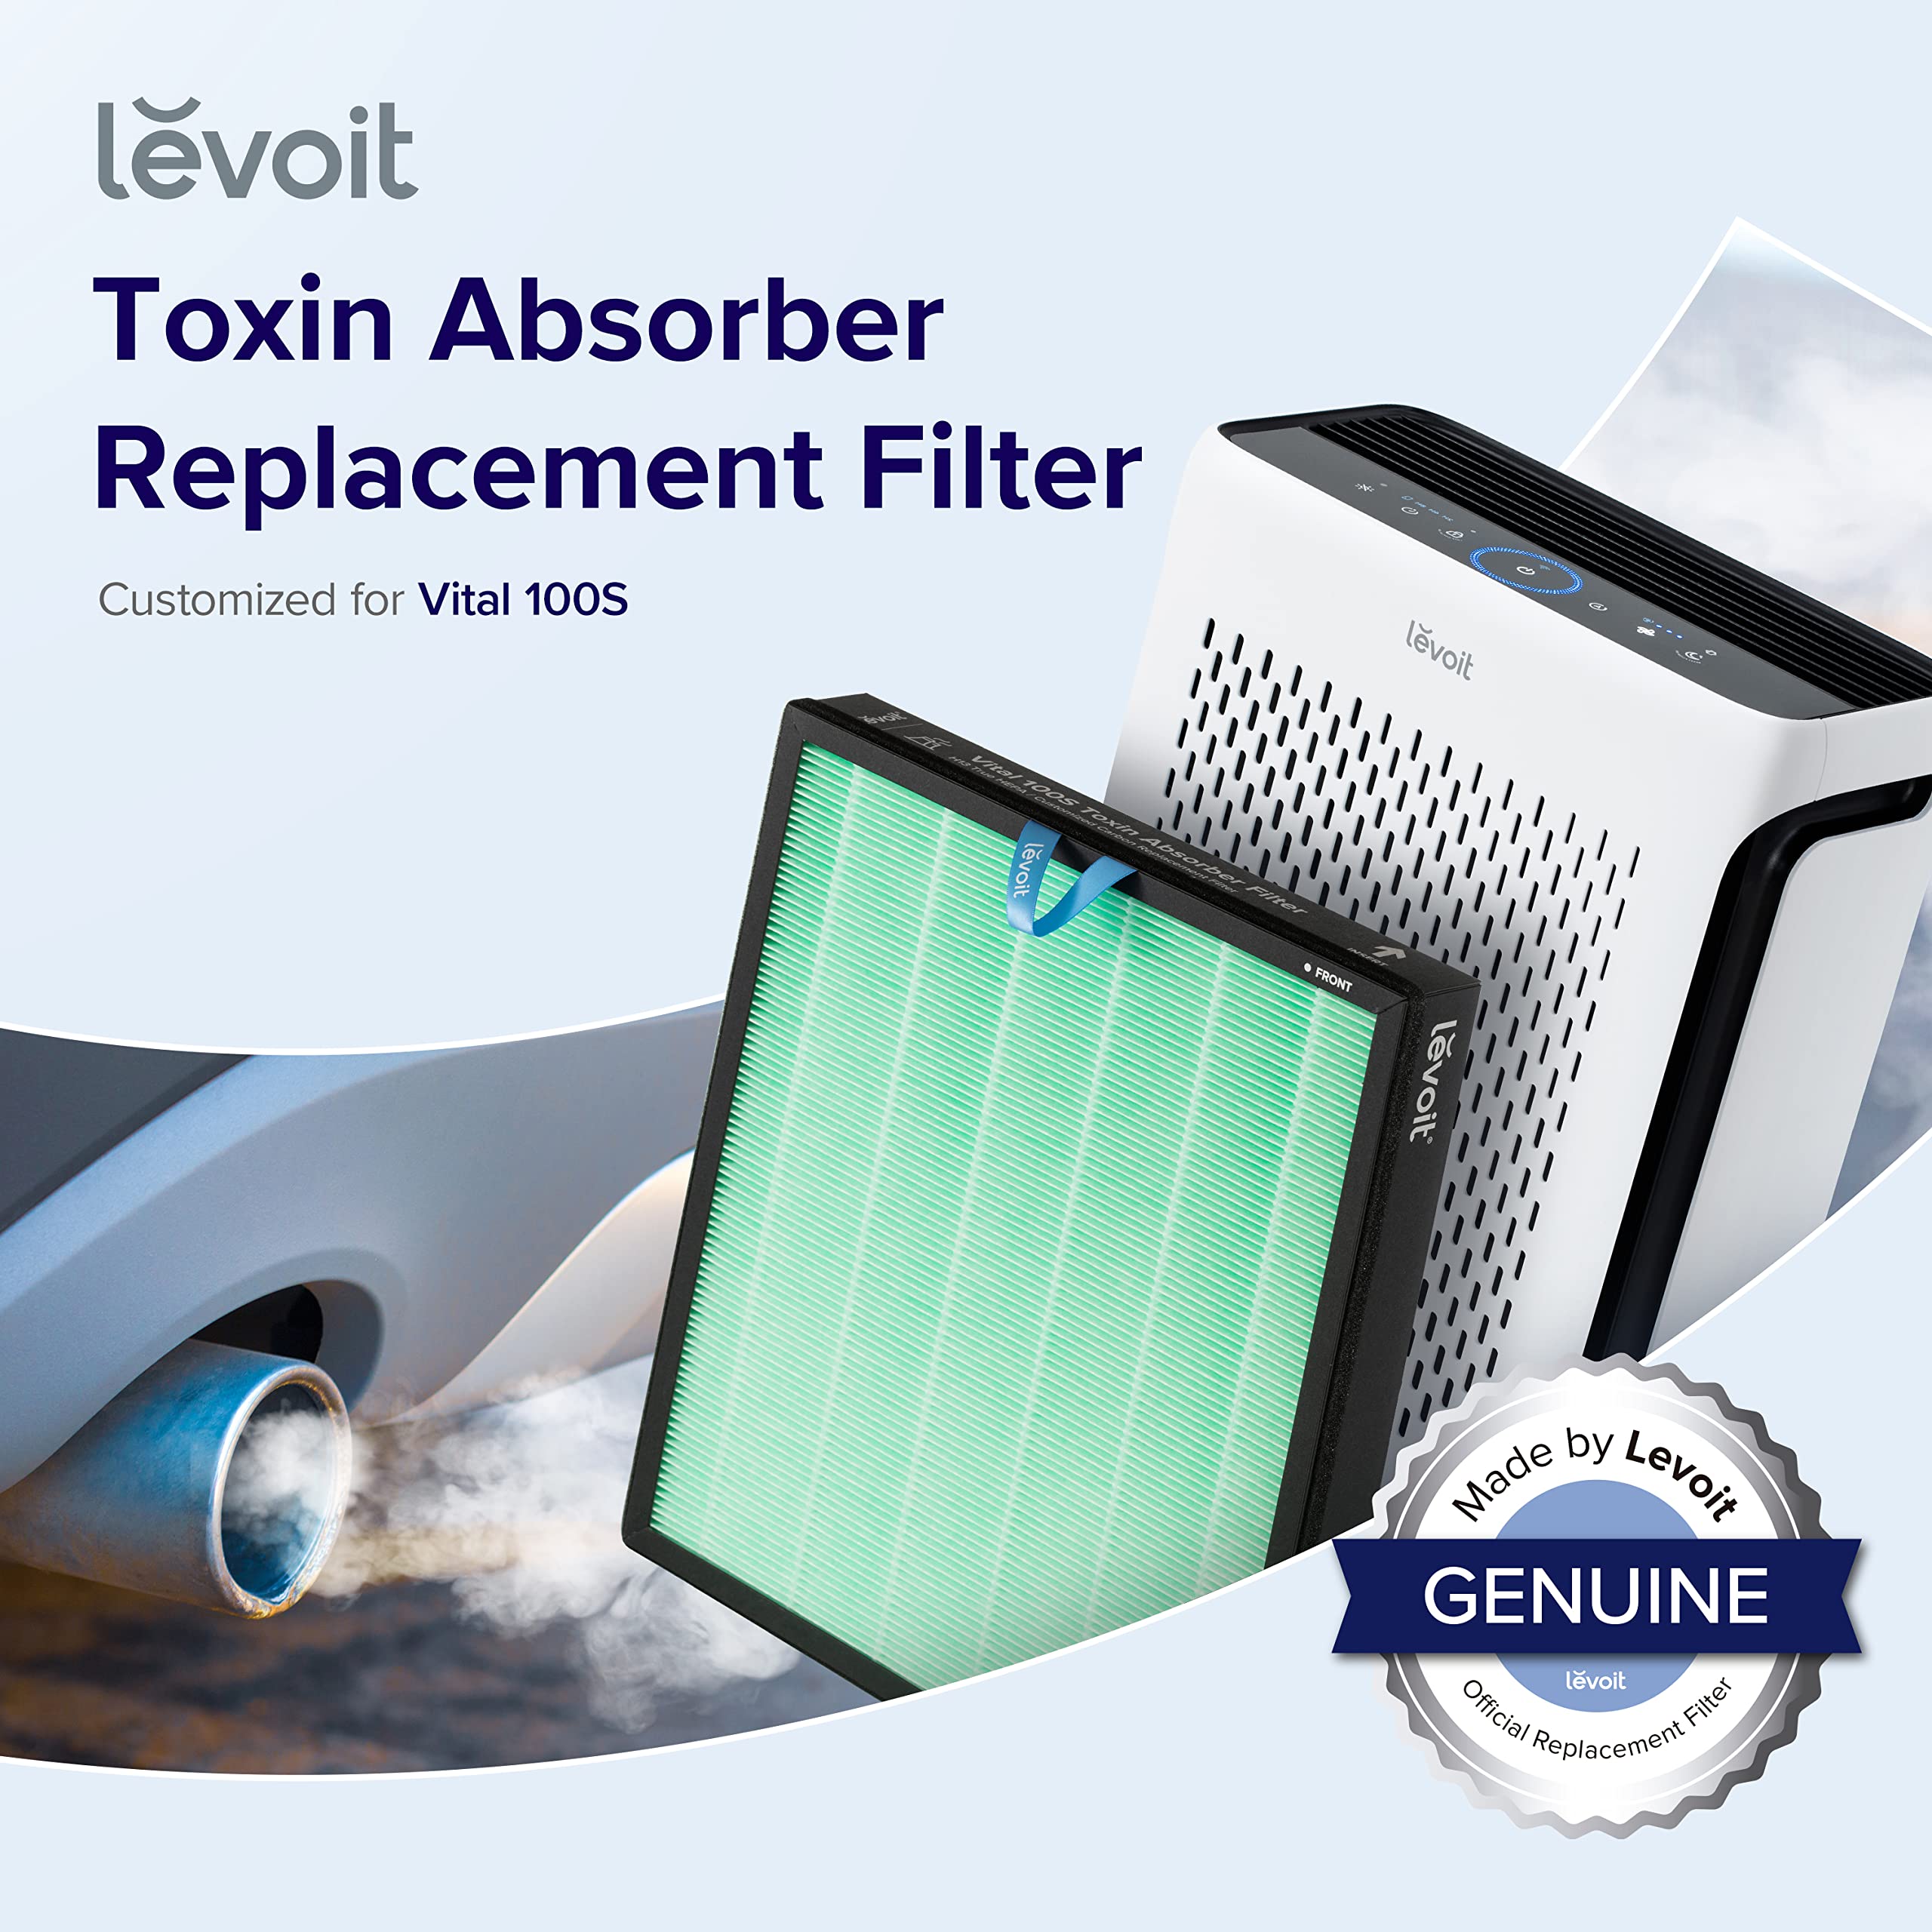 LEVOIT Vital 100S Air Purifier Toxin Absorber Replacement Filter, 3-in-1 HEPA High-Efficiency Activated Carbon, Vital 100S-RF-TX, 1 Pack, Green